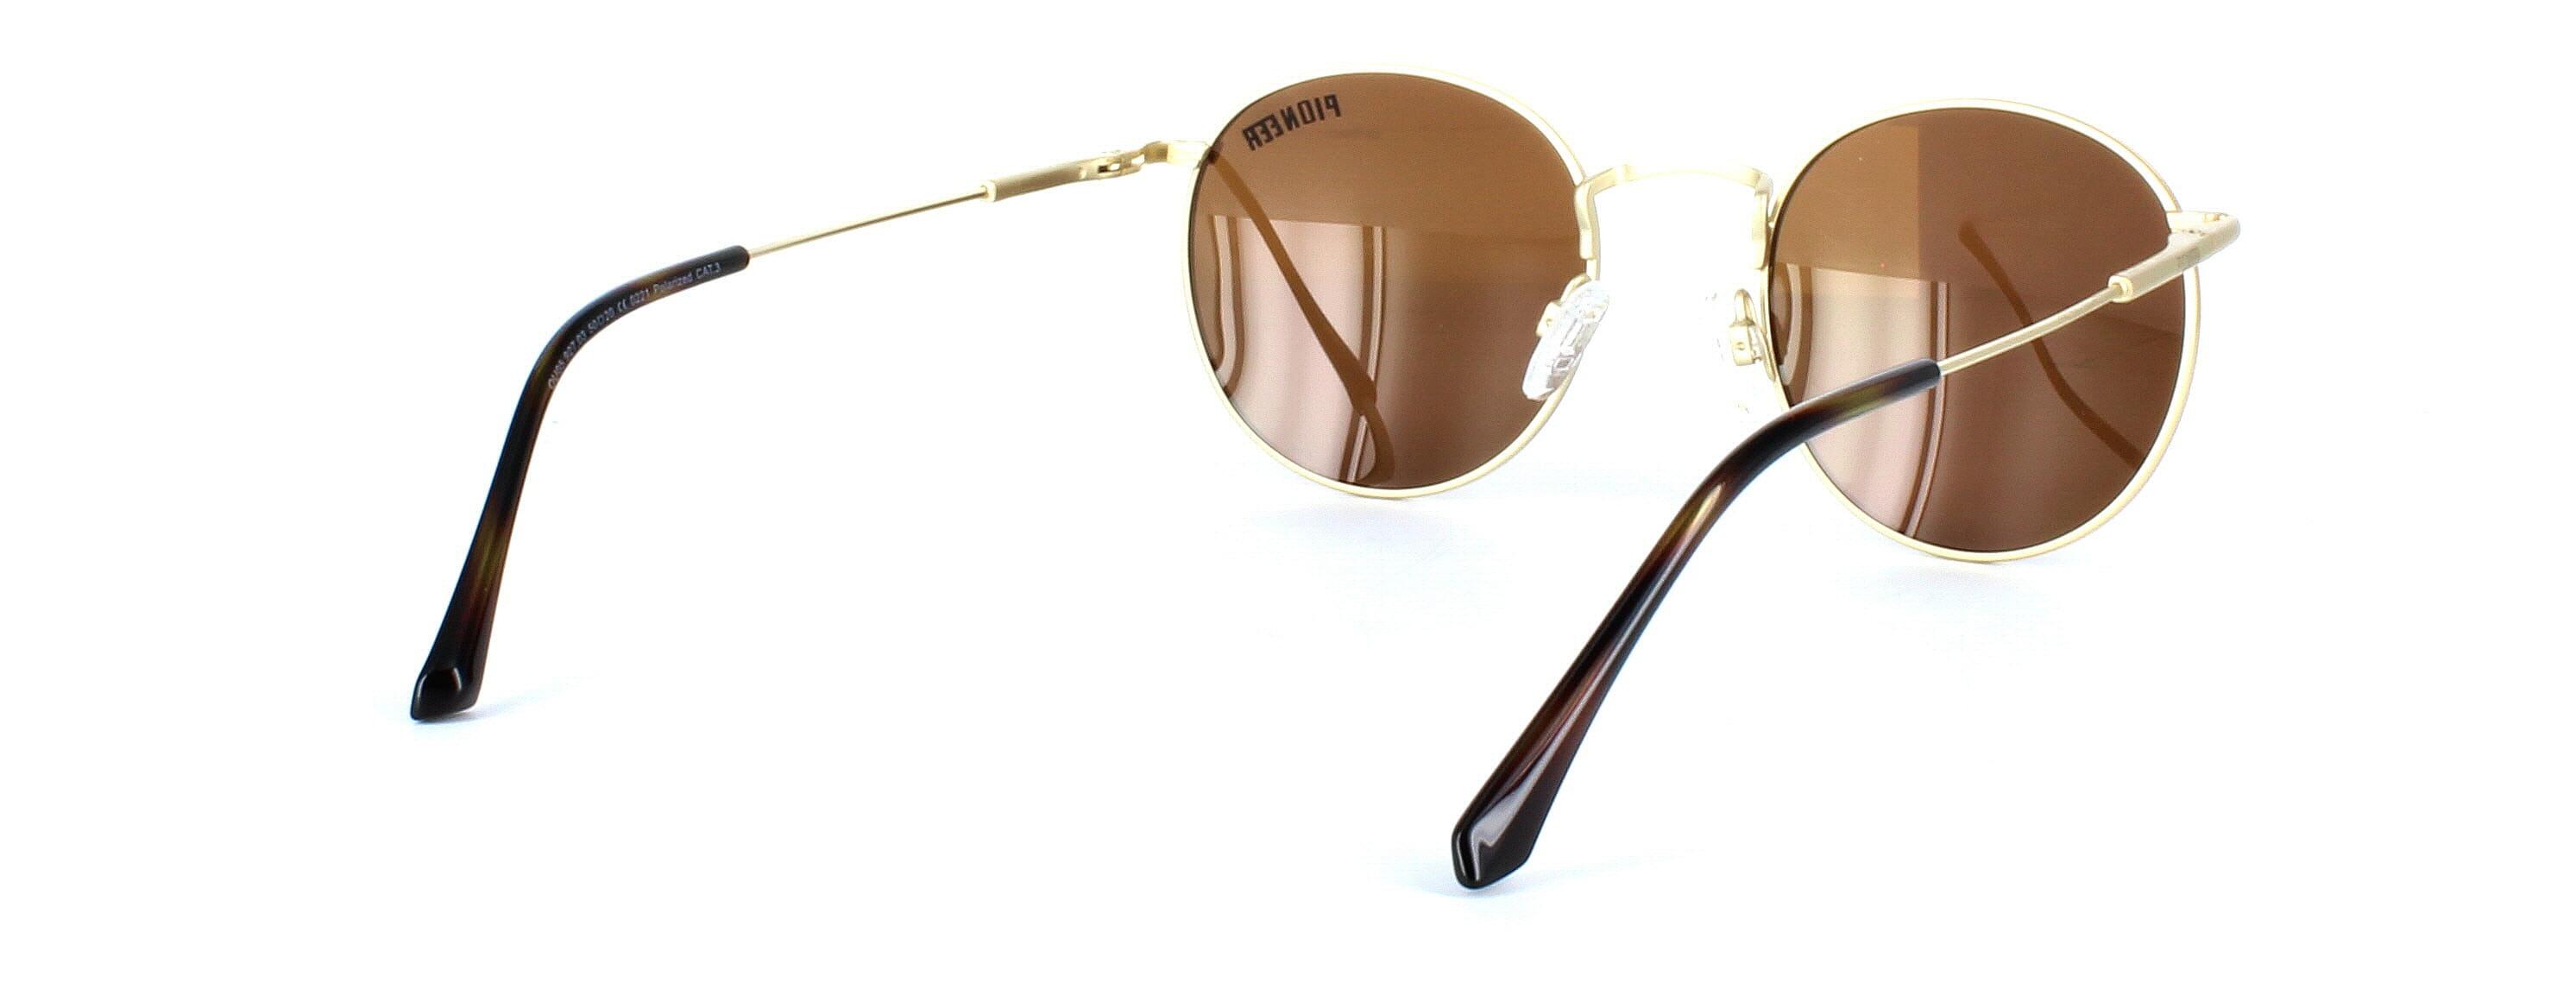 Olmeto - Unisex round shaped prescription sunglasses in gold - choose green, brown or grey tints inc in the price - image view 5